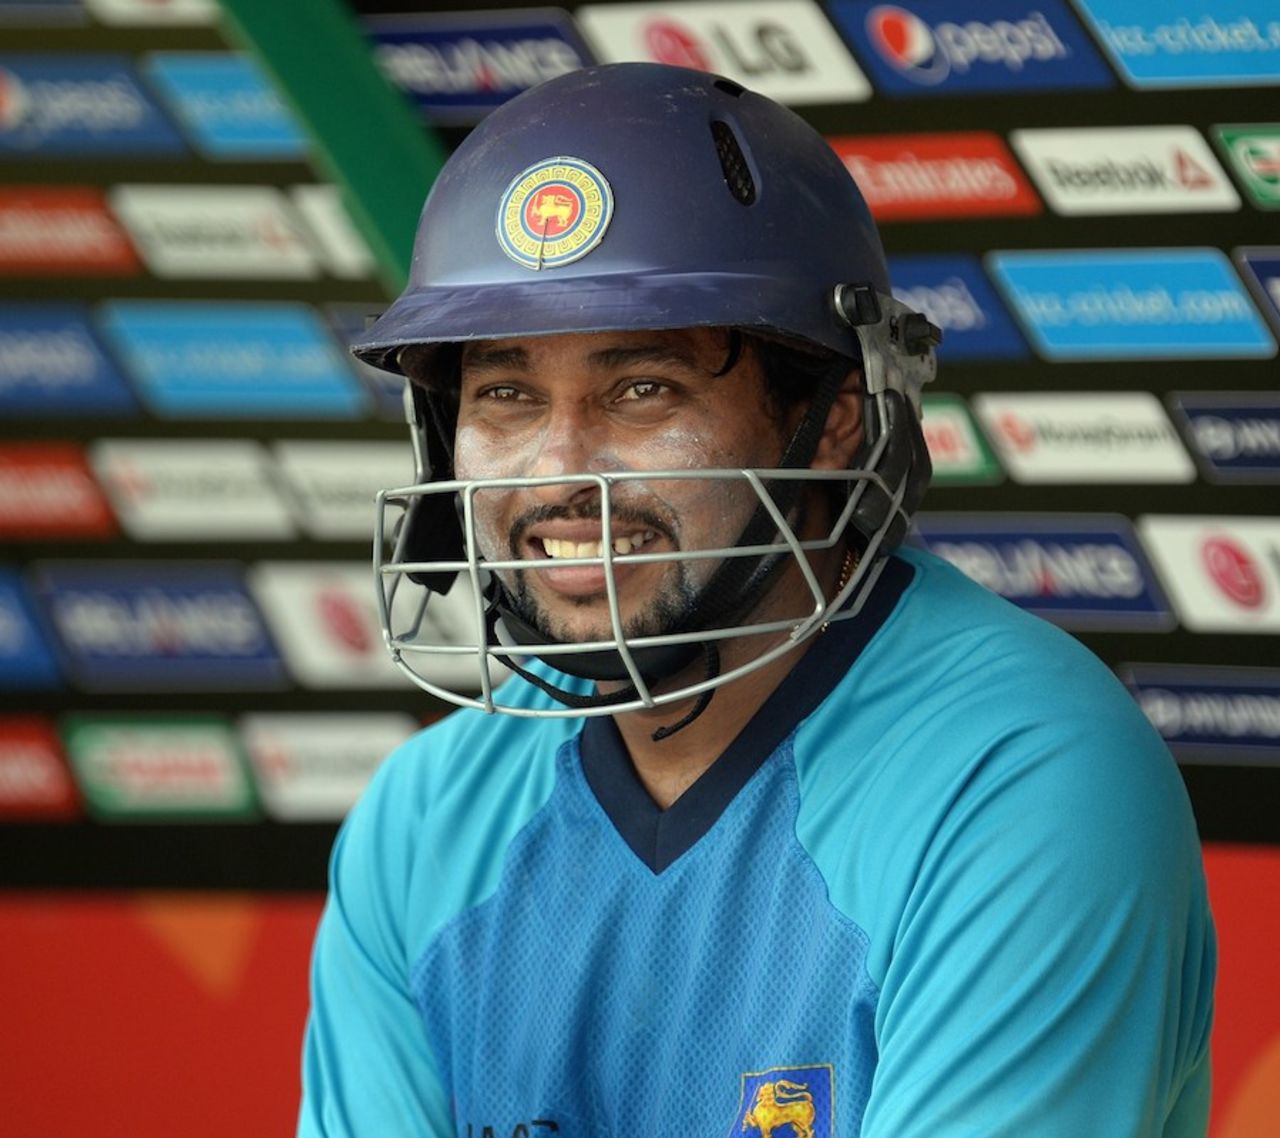 Tillakaratne Dilshan during a training session, Chittagong, March 21, 2014